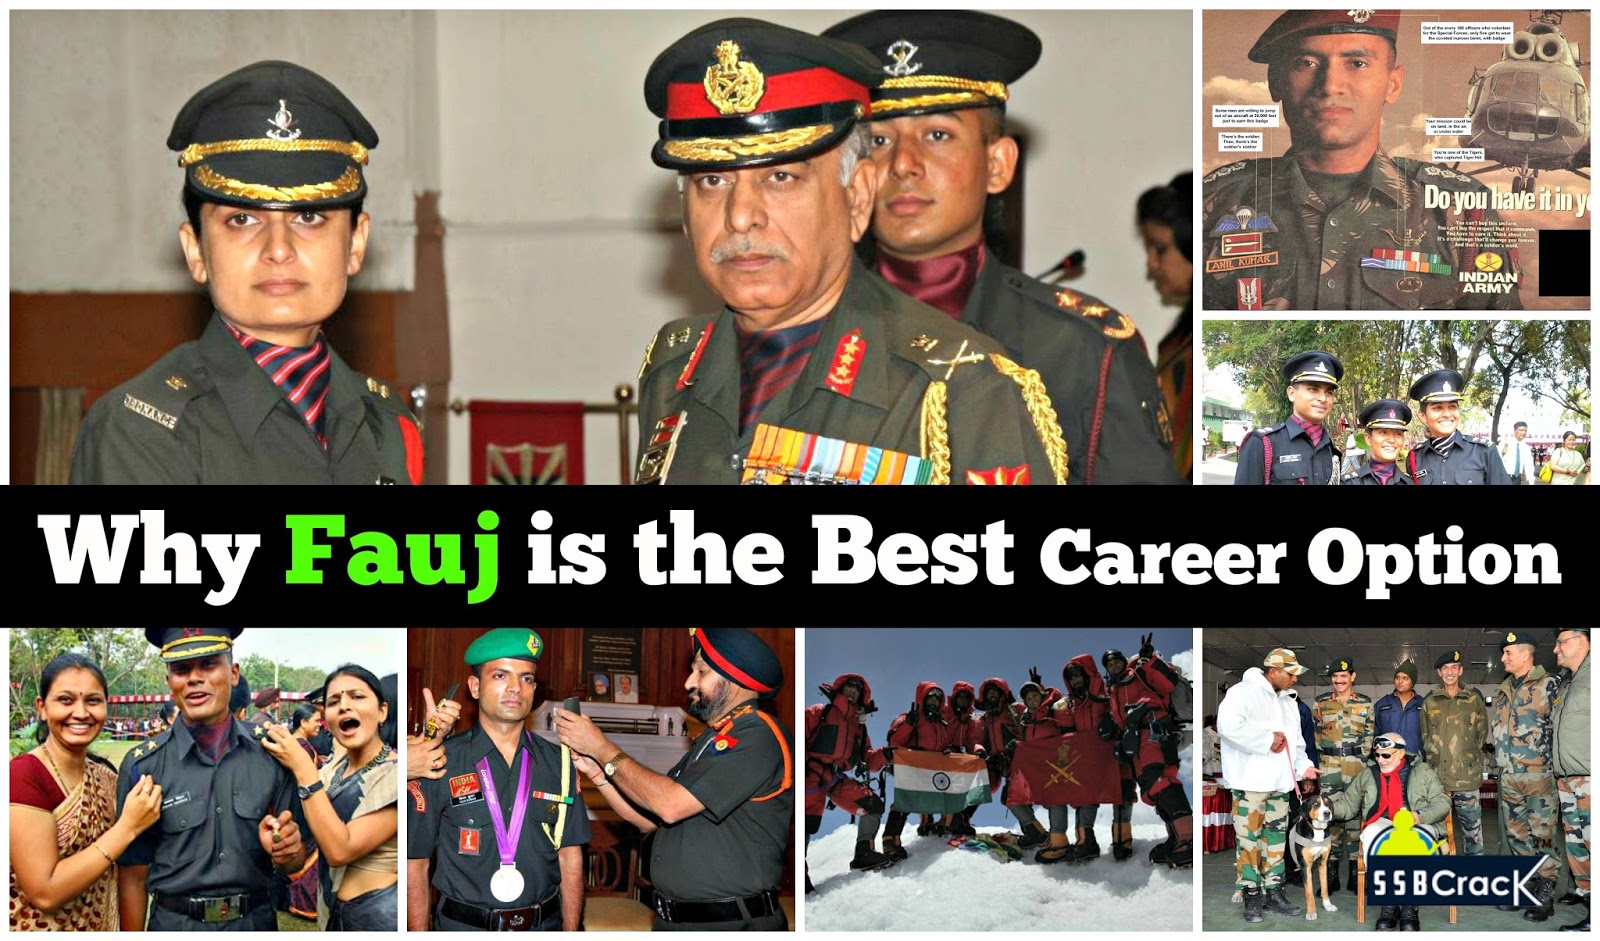 Why Fauj is the Best Career Option